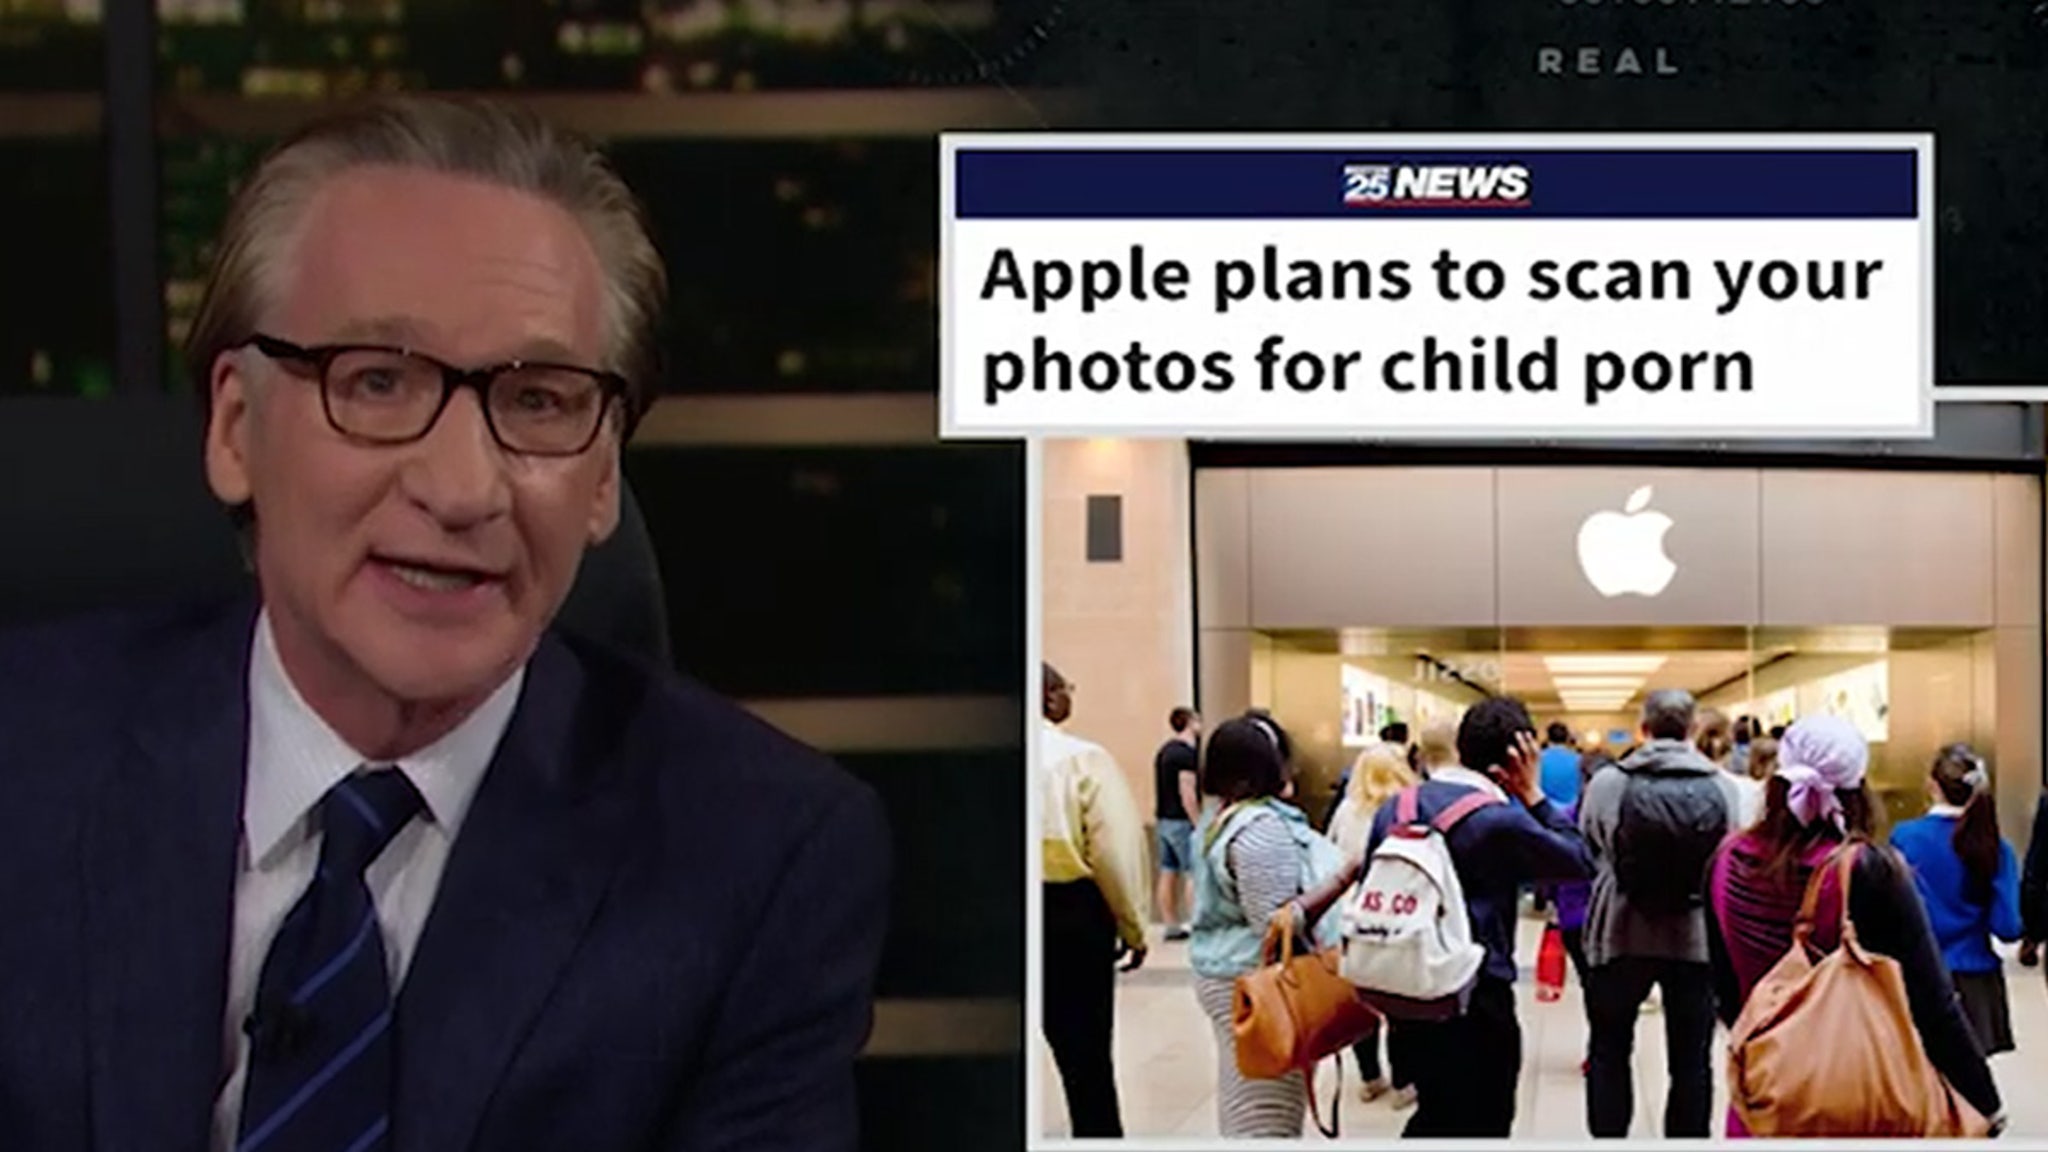 Bill Maher Says Apple's Move to Check Phones for Child Porn is Appalling